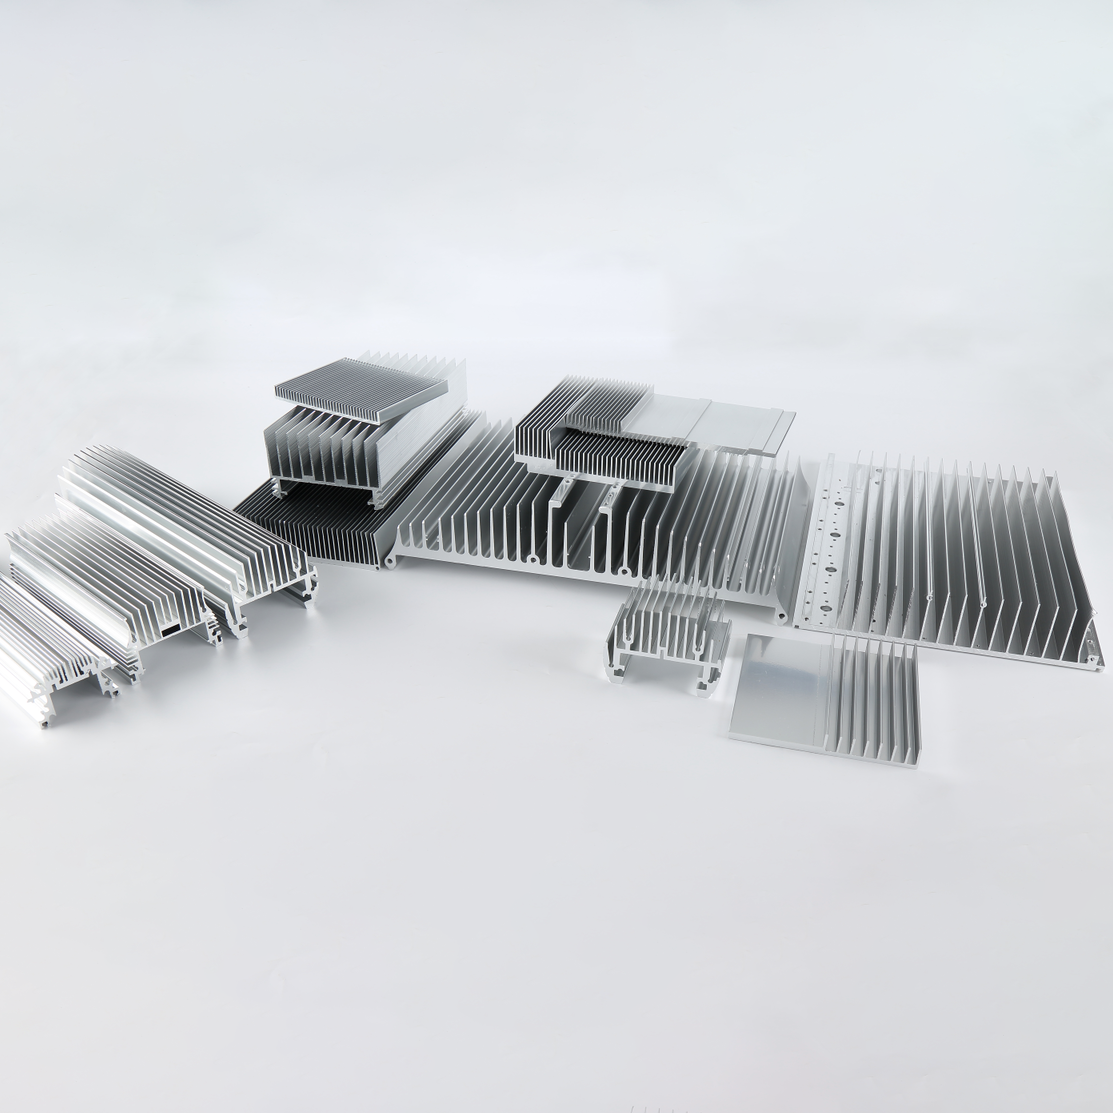 Extruded Industry Aluminum Cooling Radiator